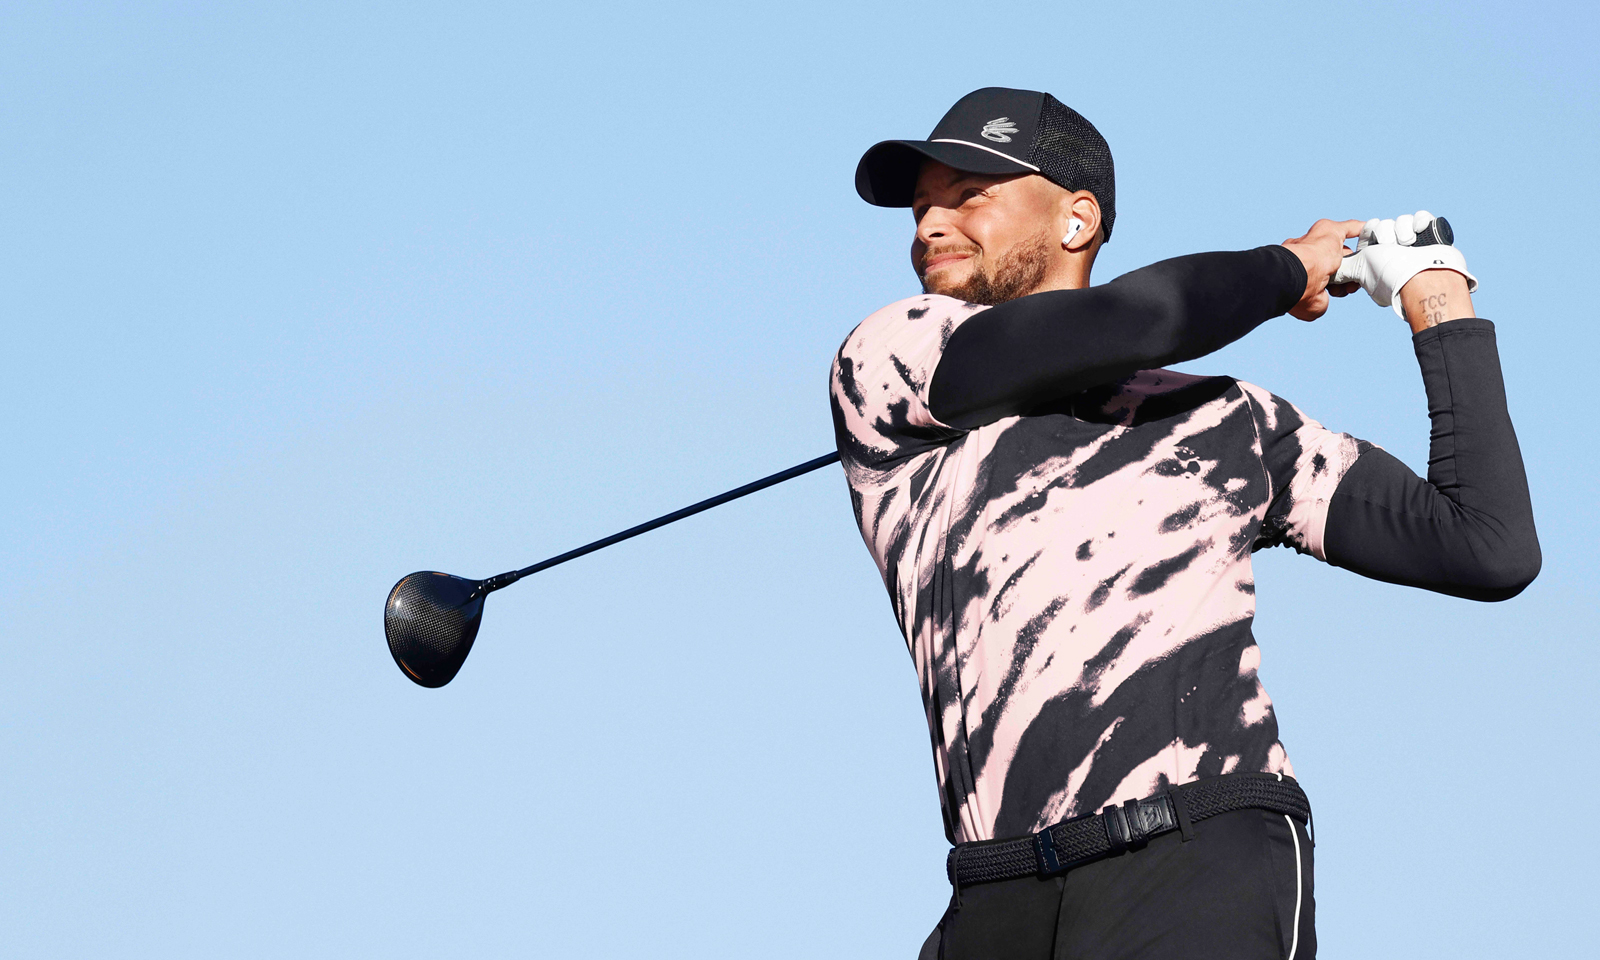 The Steph Curry and his Curry Brand Launches First Golf Apparel Collection